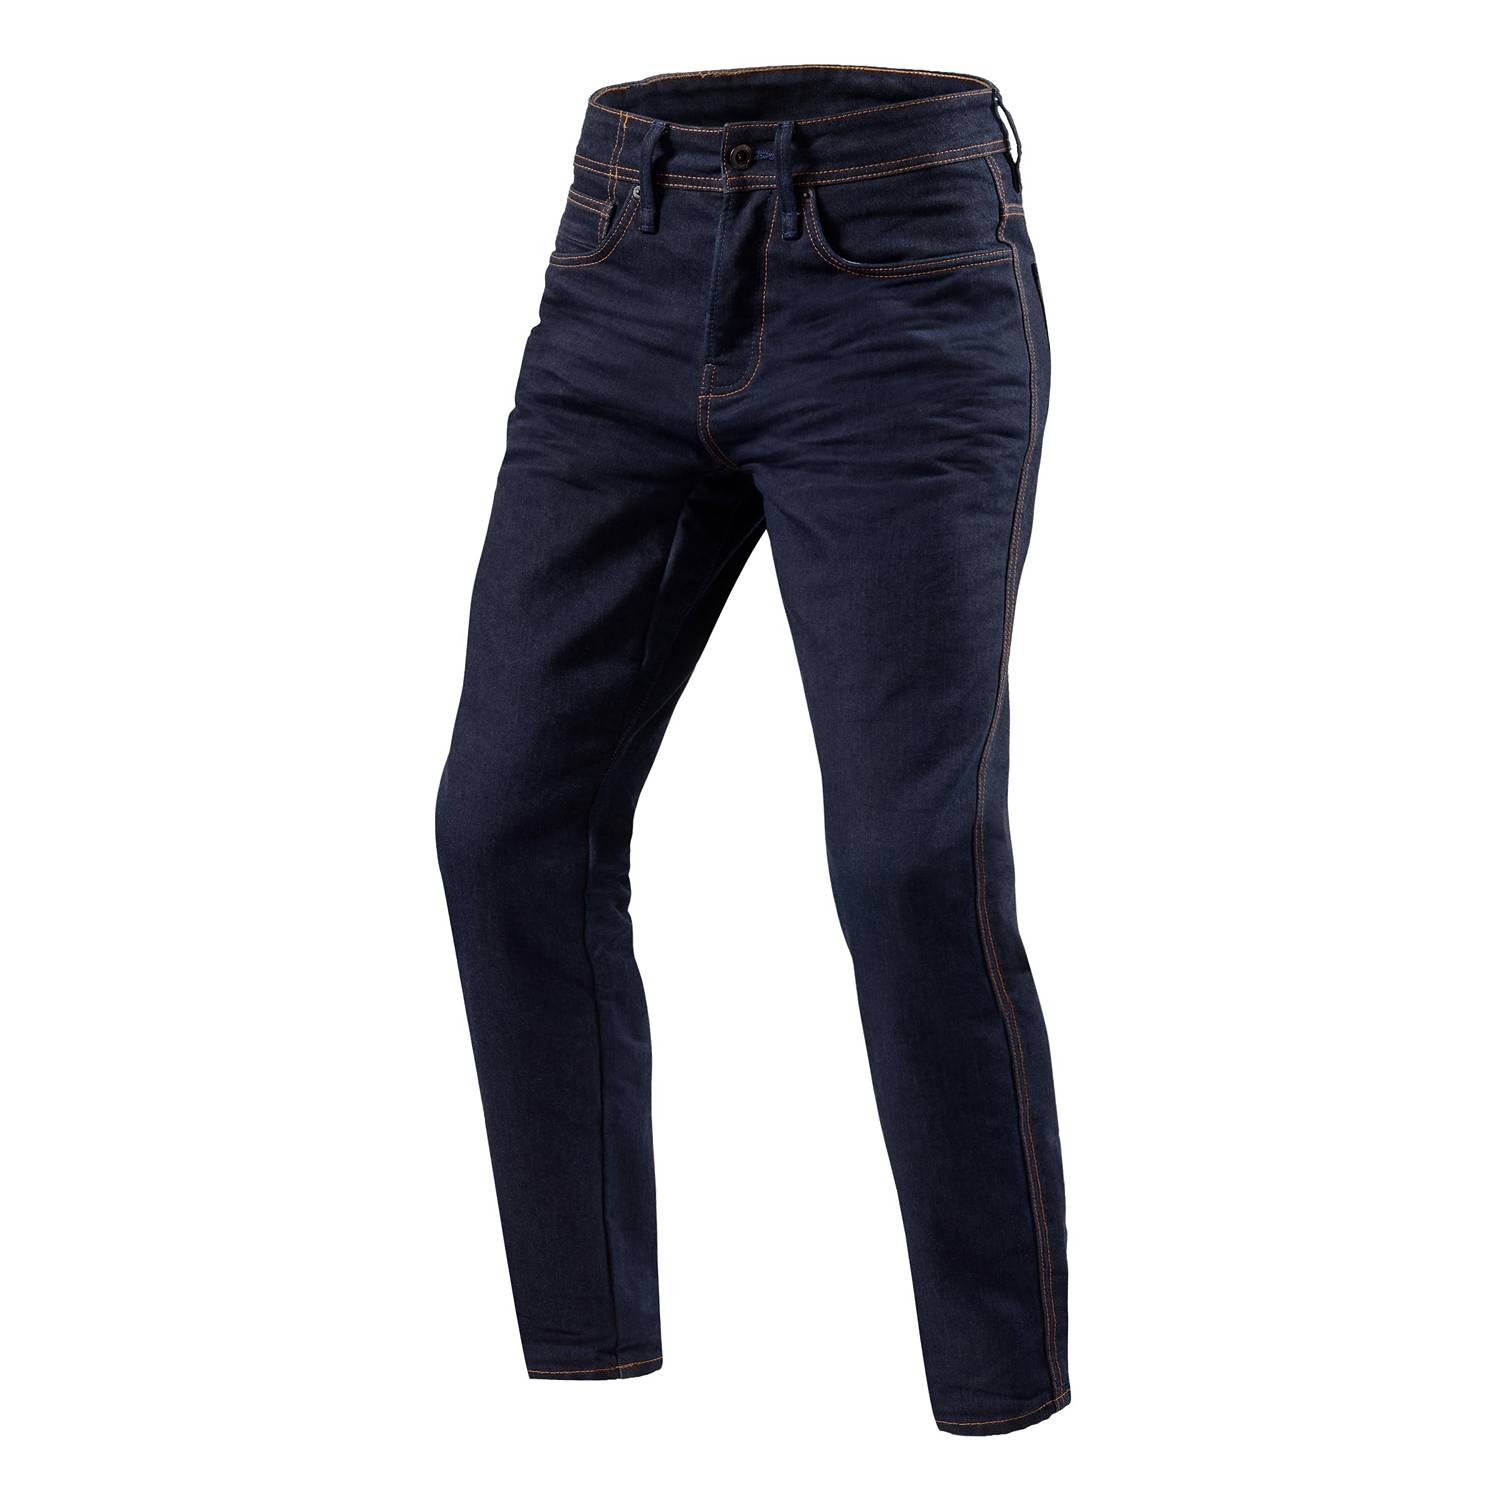 Image of REV'IT! Jeans Reed RF Dark Blue Used Motorcycle Jeans Size L34/W36 ID 8700001336932